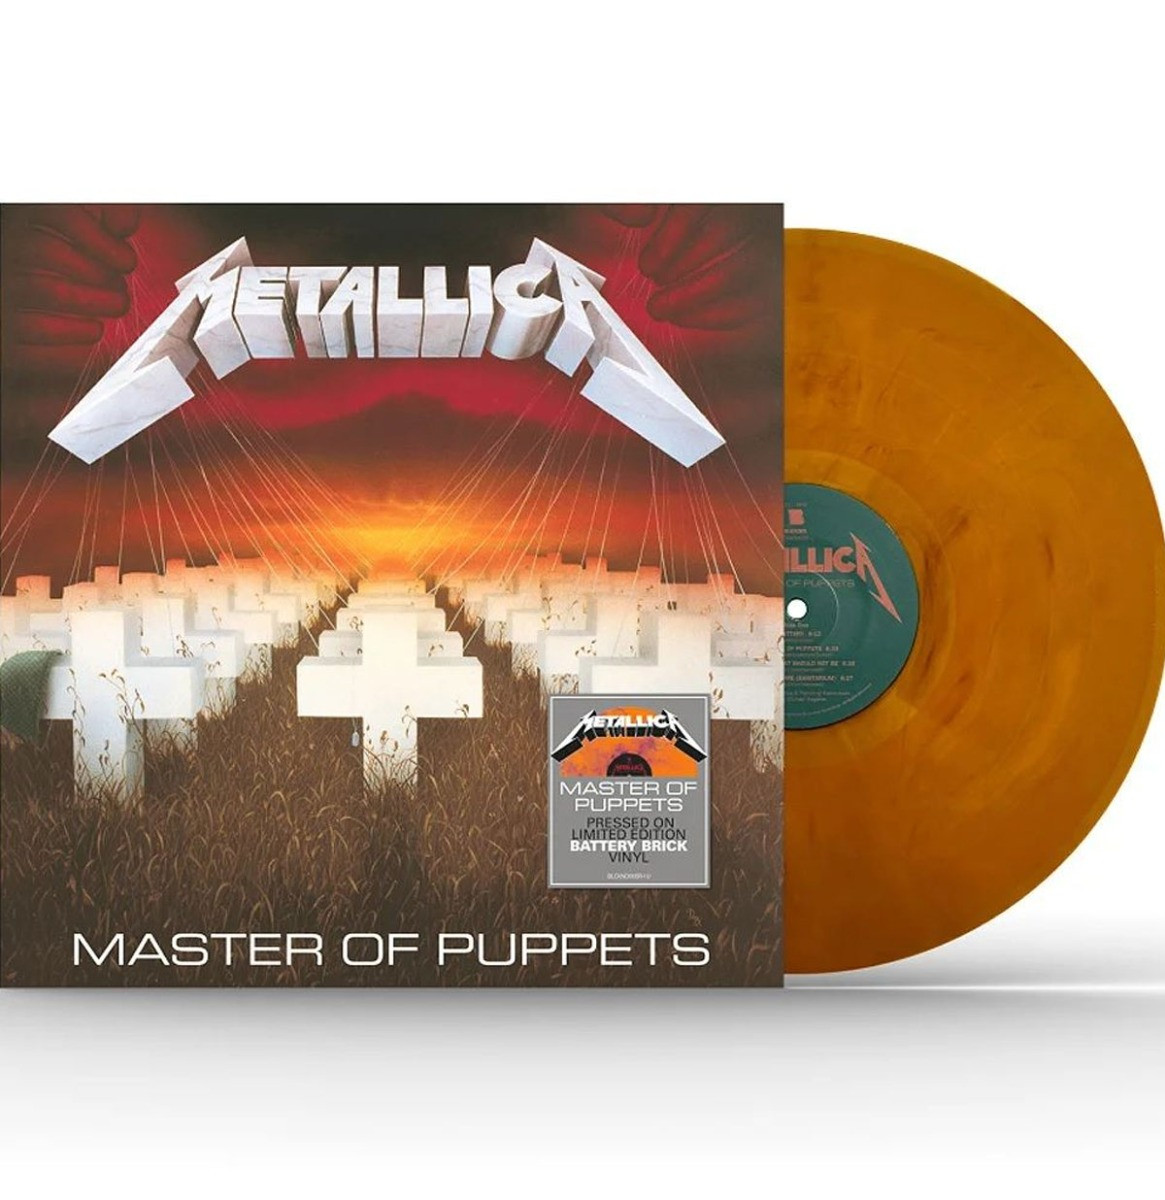 Metallica - Master Of Puppets (Limited Edition) LP